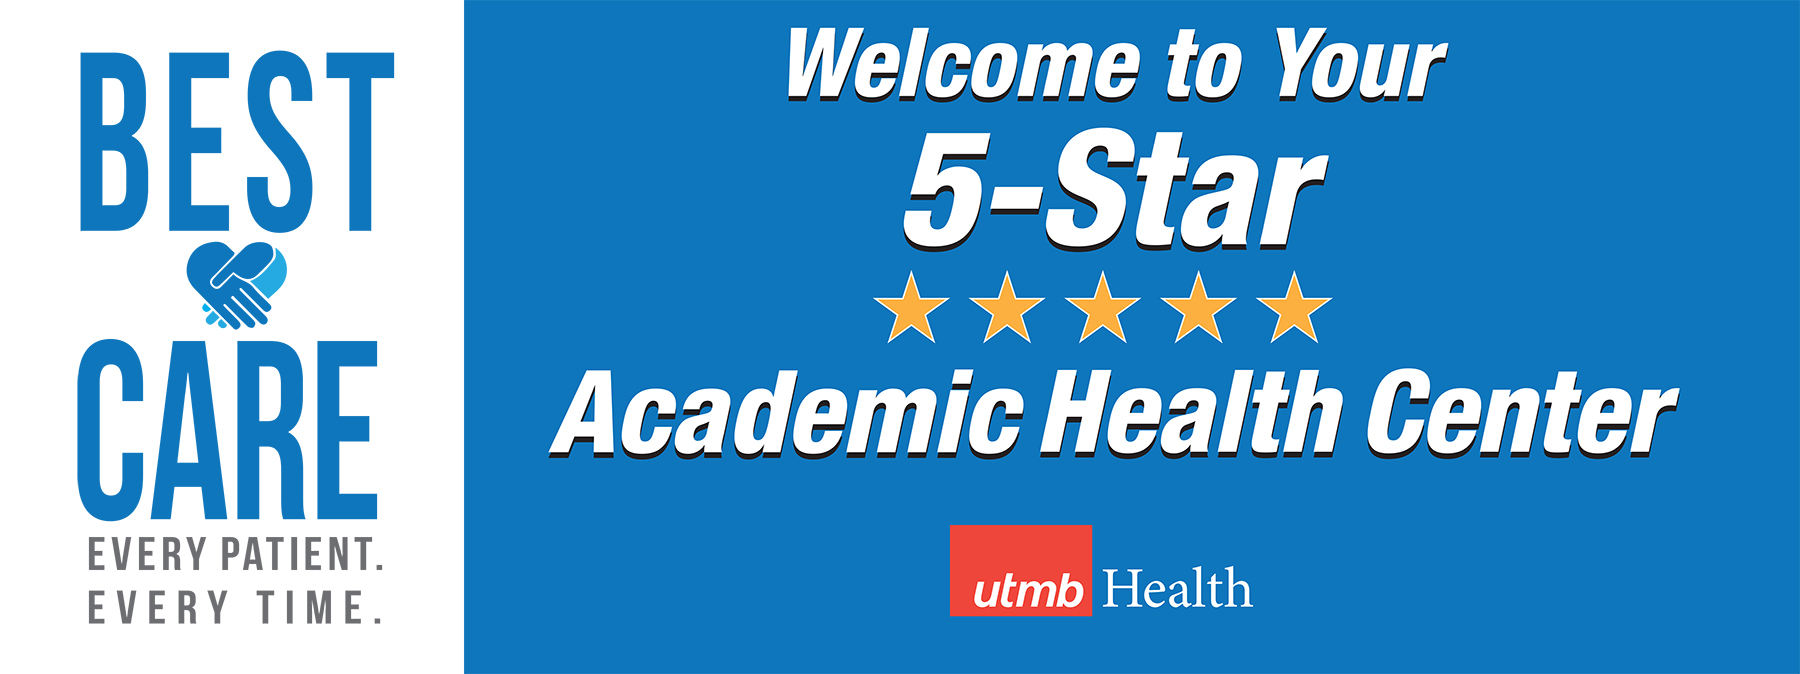 Welcome to your 5-star academic health center (banner)